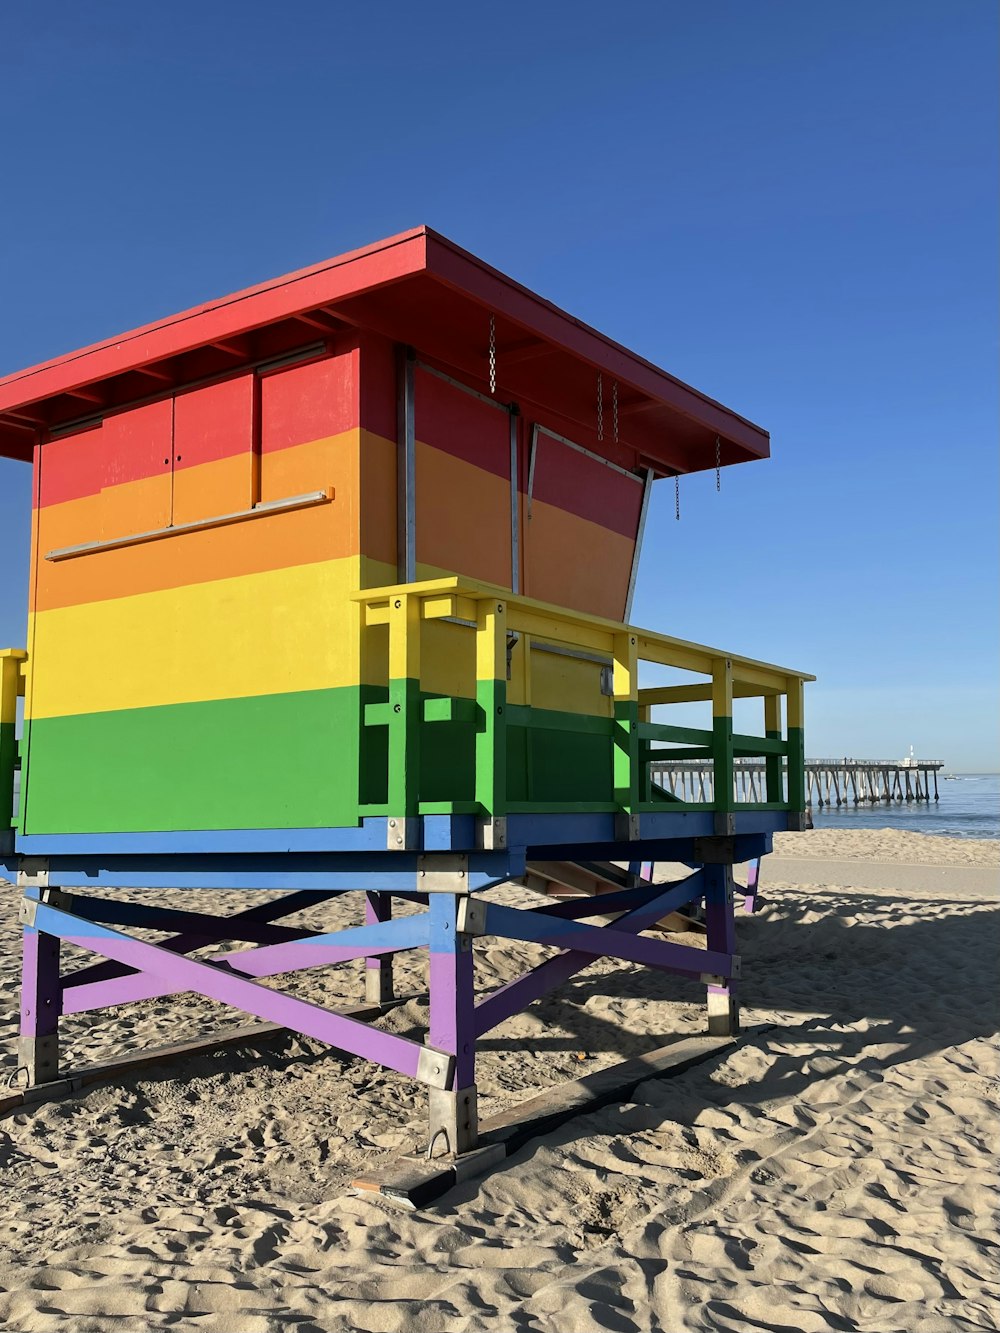 a colorful lifeguard stand on a beach with a pier in the background